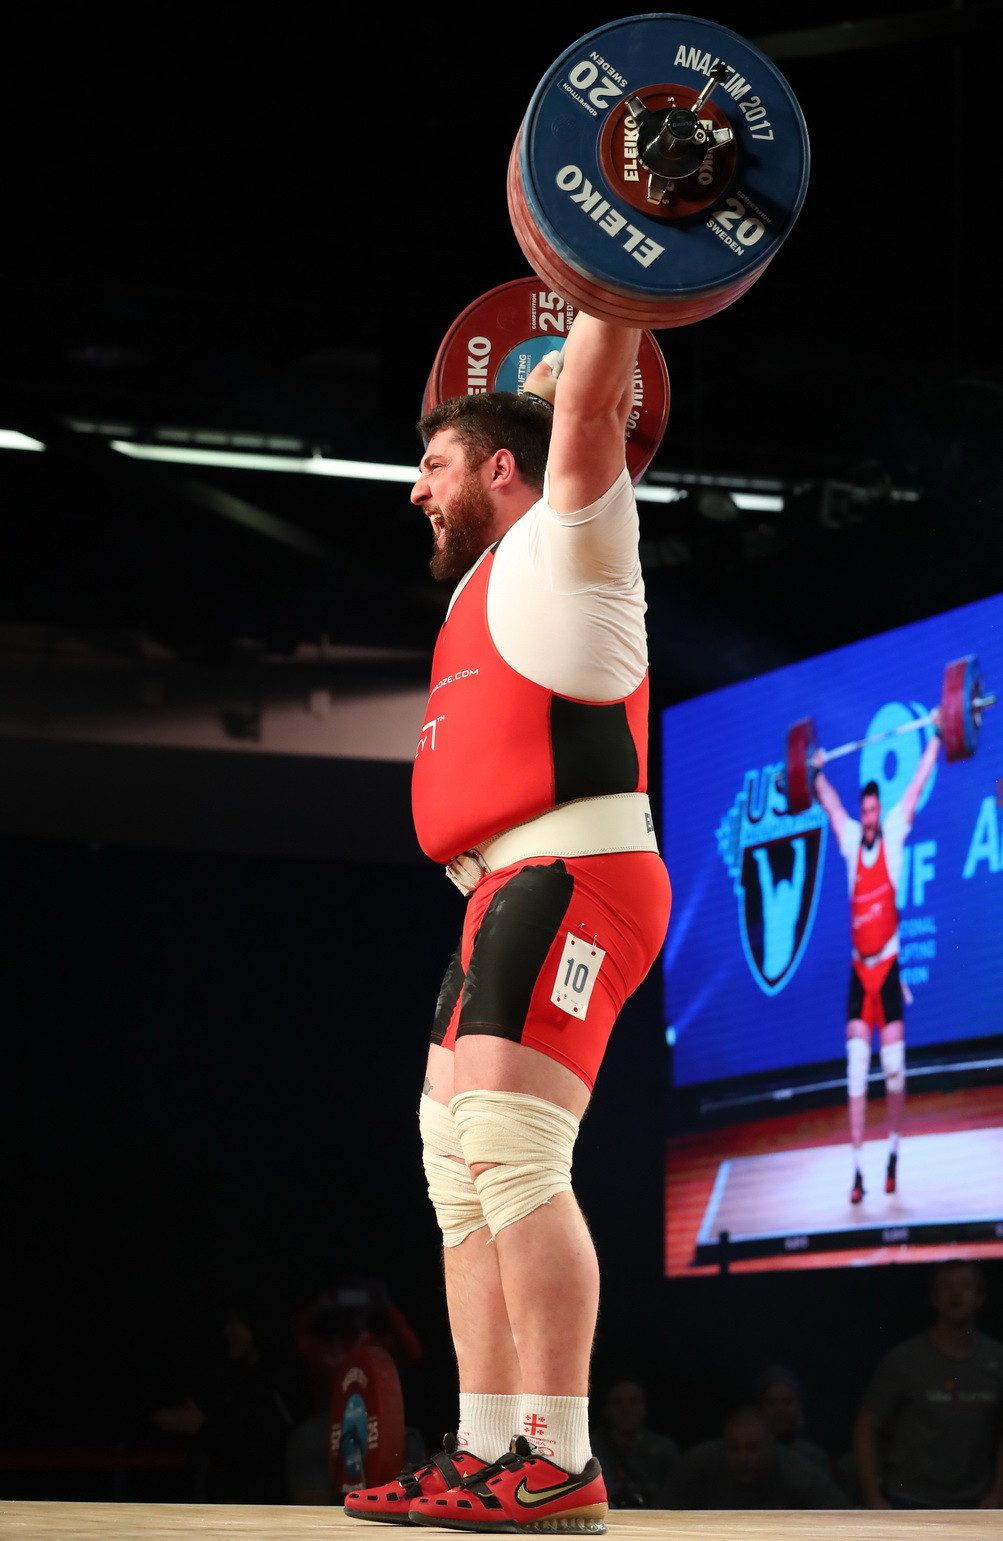 Reigning Olympic champion Lasha Talakhadze broke the men’s over 105kg snatch and overall world records on his way to claiming a hat-trick of gold medals today ©IWF